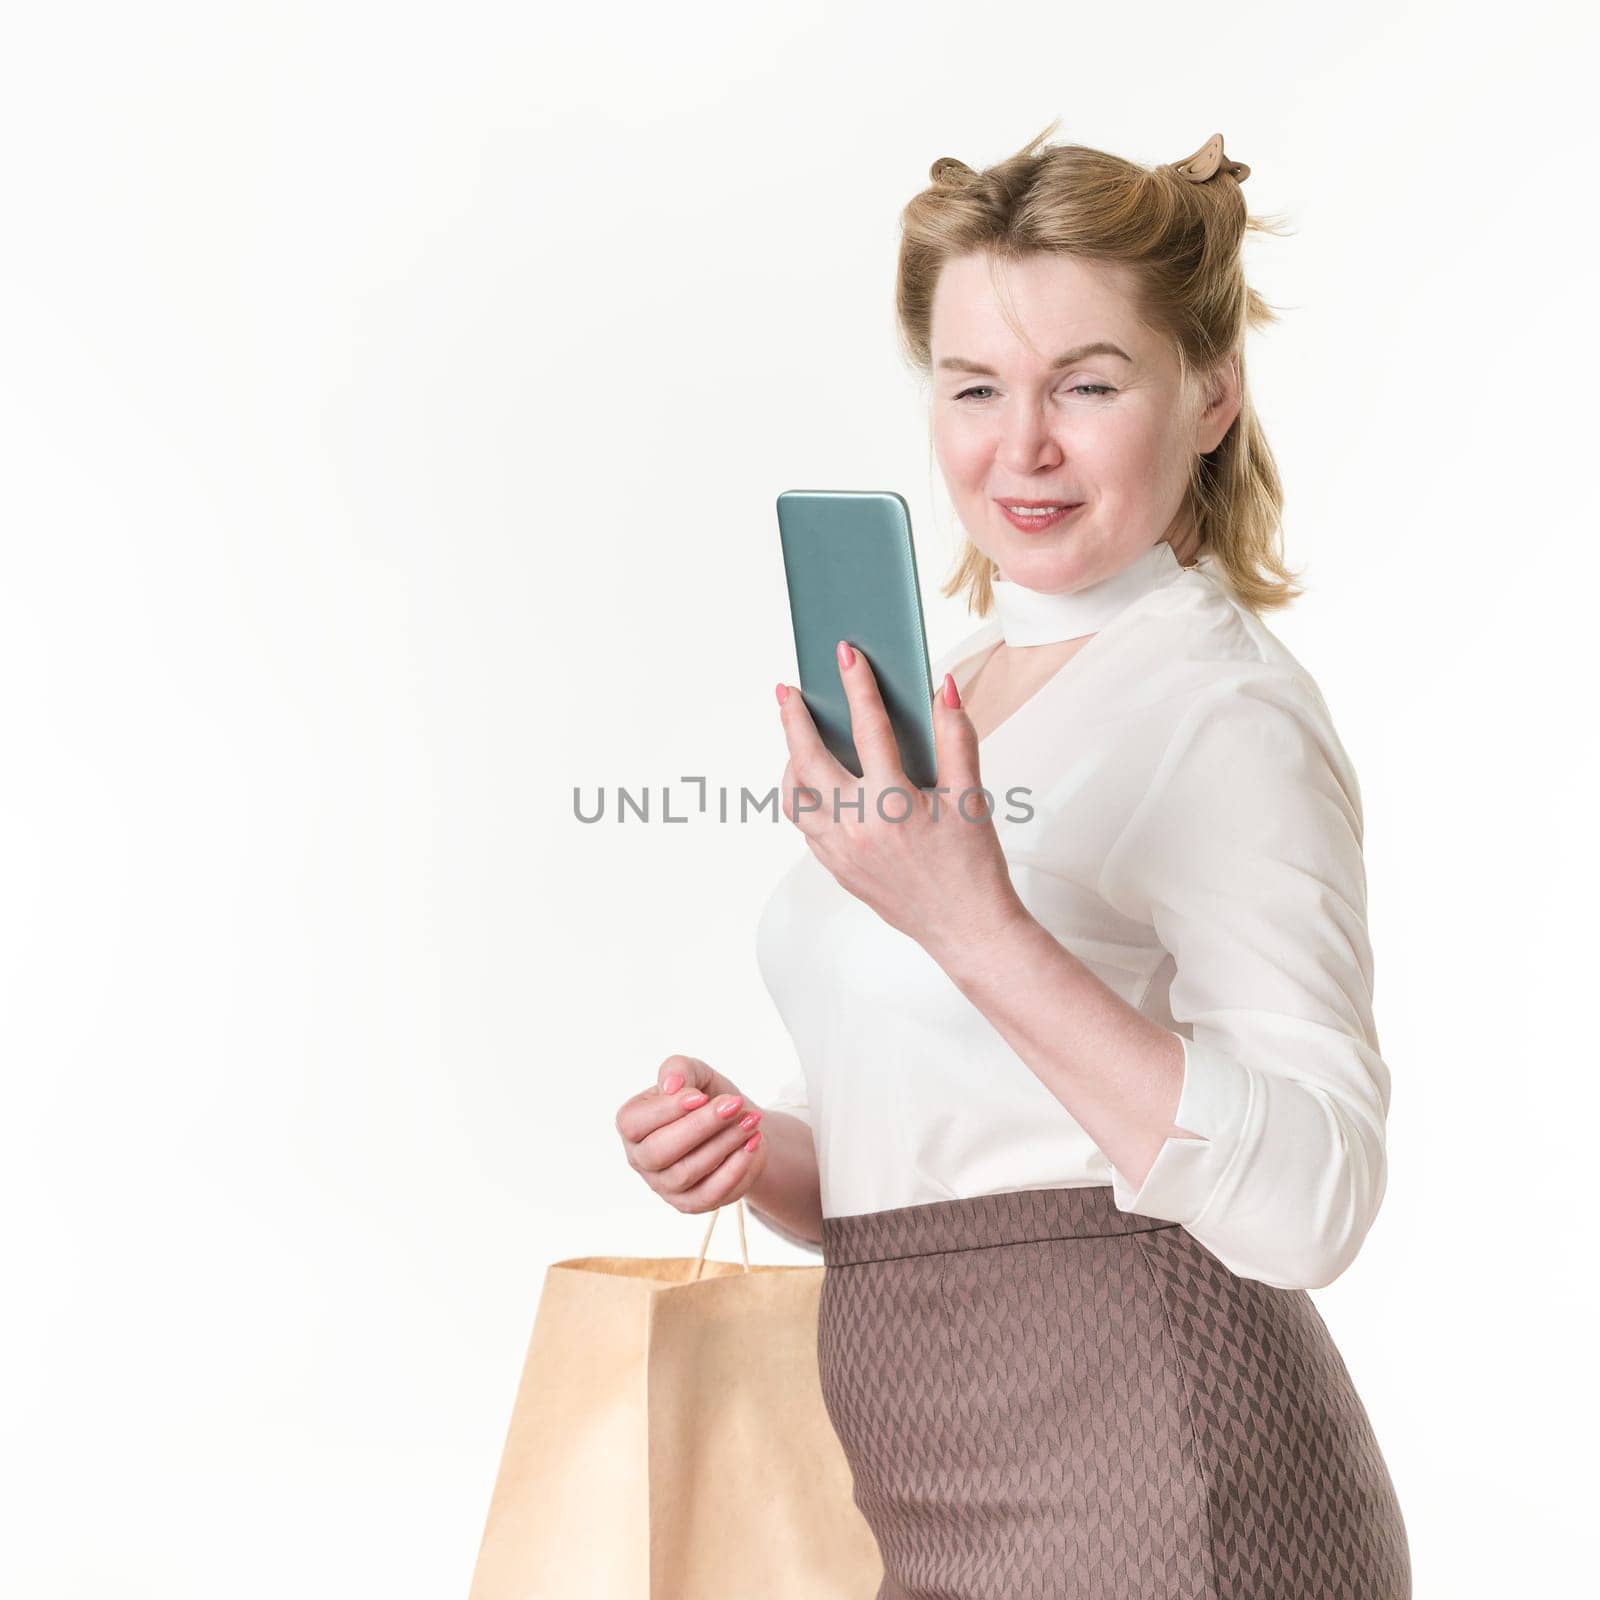 Happy shopaholic women using mobile phone for making payment. Black Friday and shopping online concept. 49 years old smiling woman shopper in white blouse and brown skirt on white background